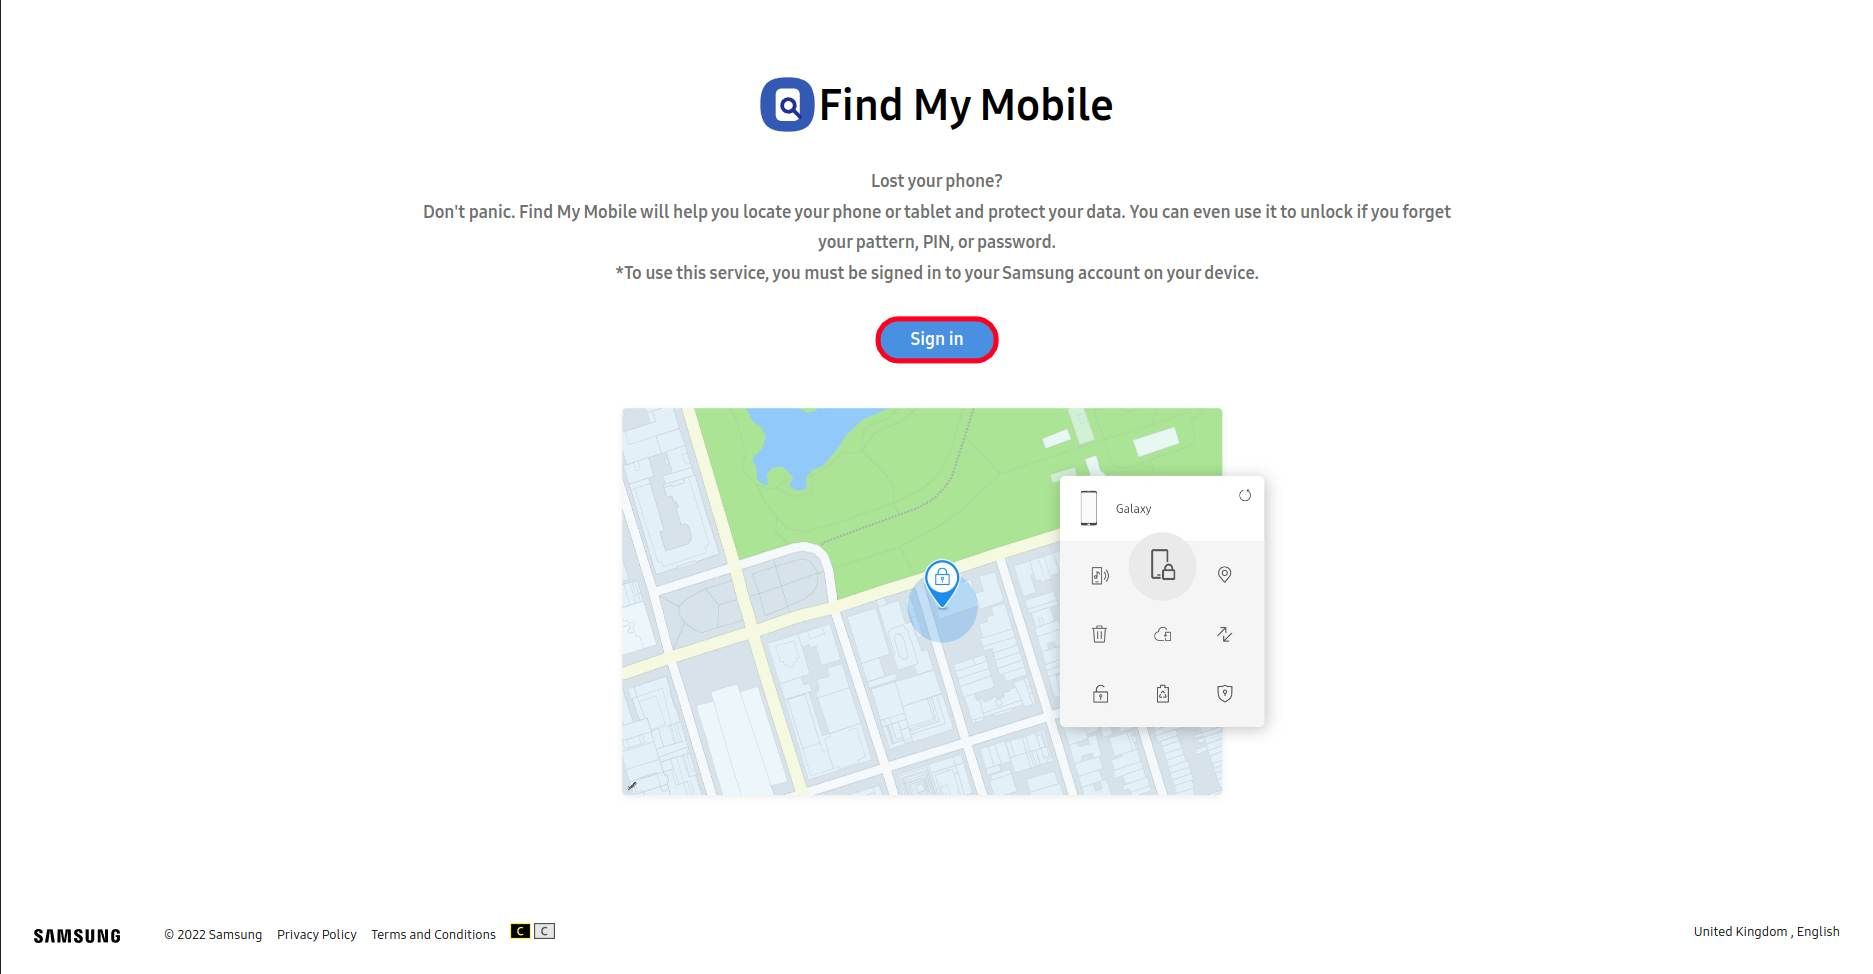 samsung find my mobile page with the sign in button highlighted